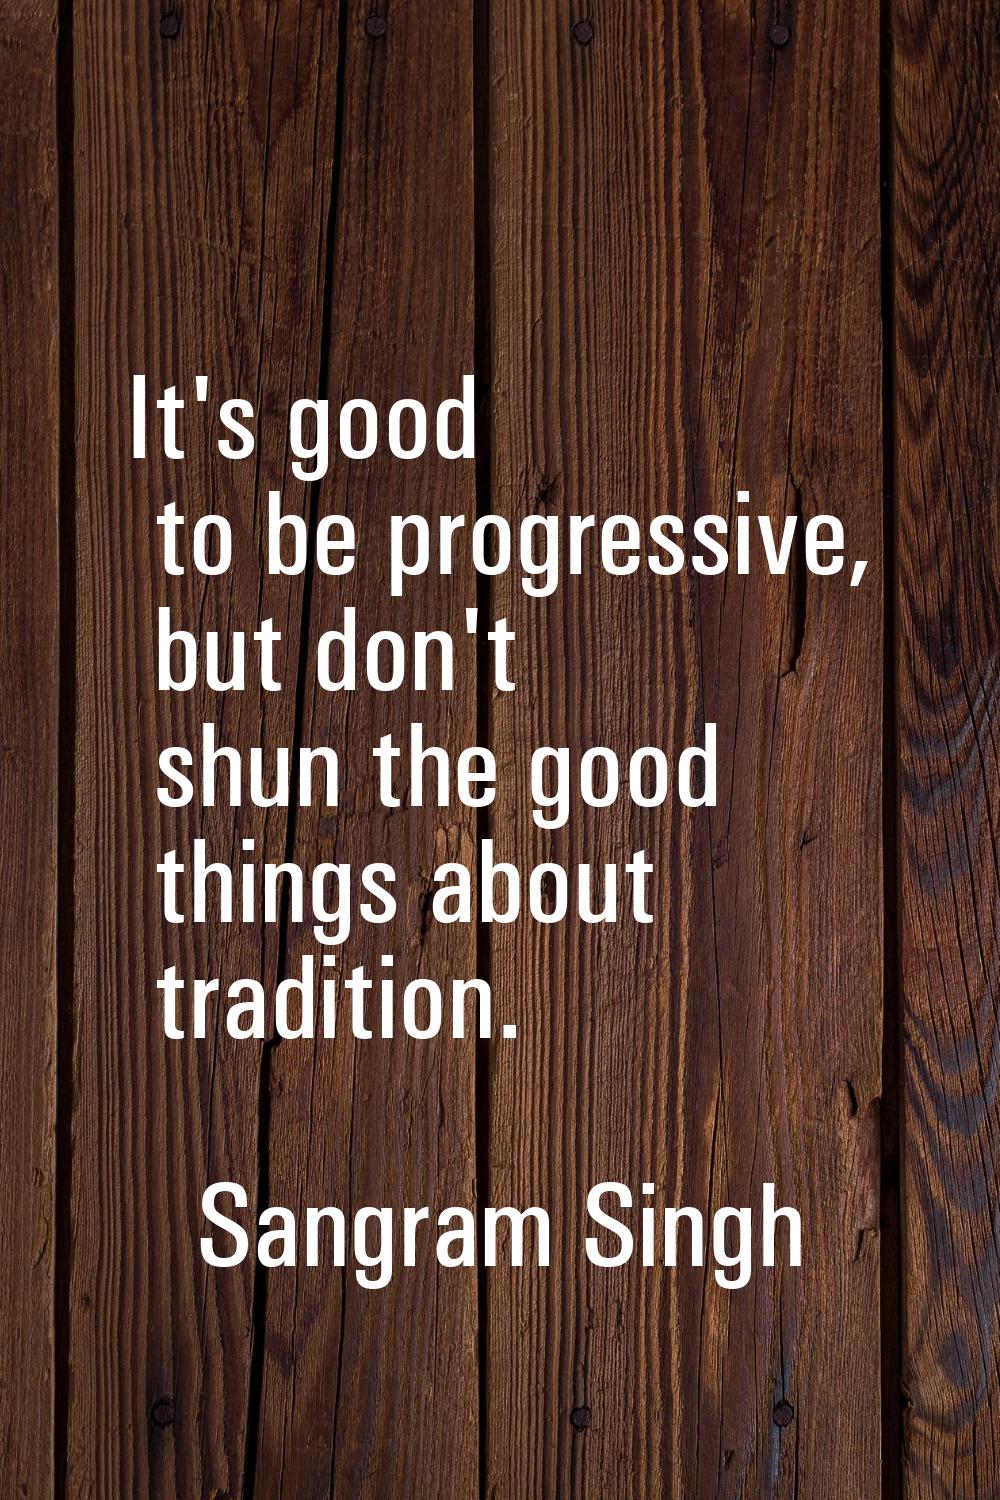 It's good to be progressive, but don't shun the good things about tradition.